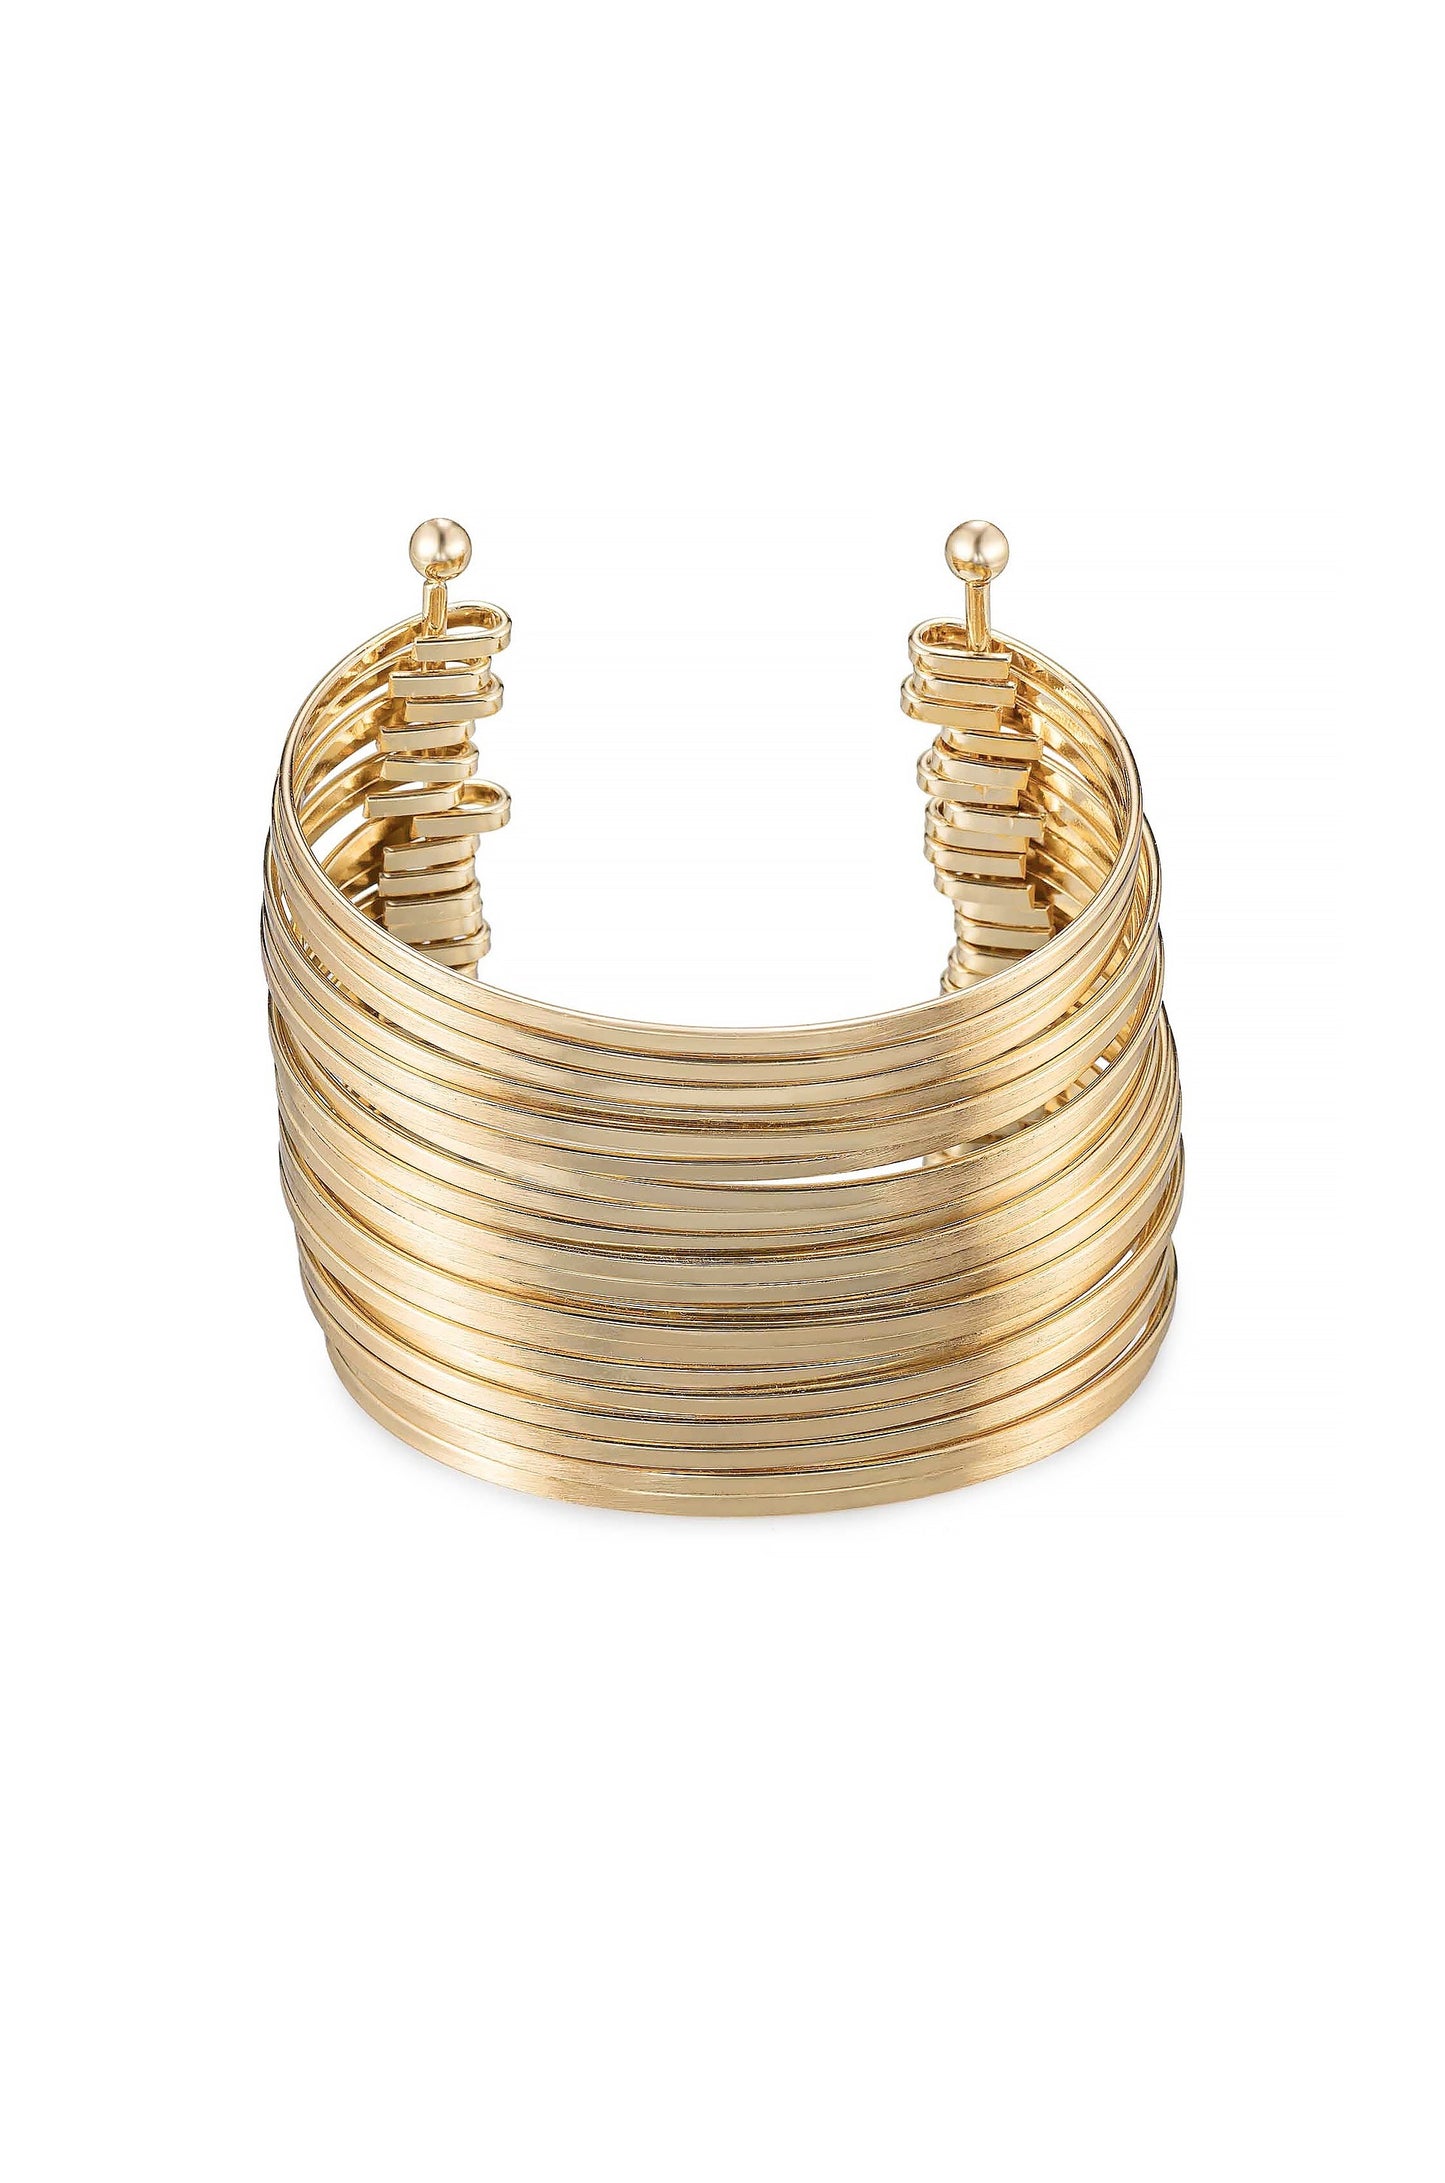 The Easy 18k Gold Plated Bangle Stacked Bracelet